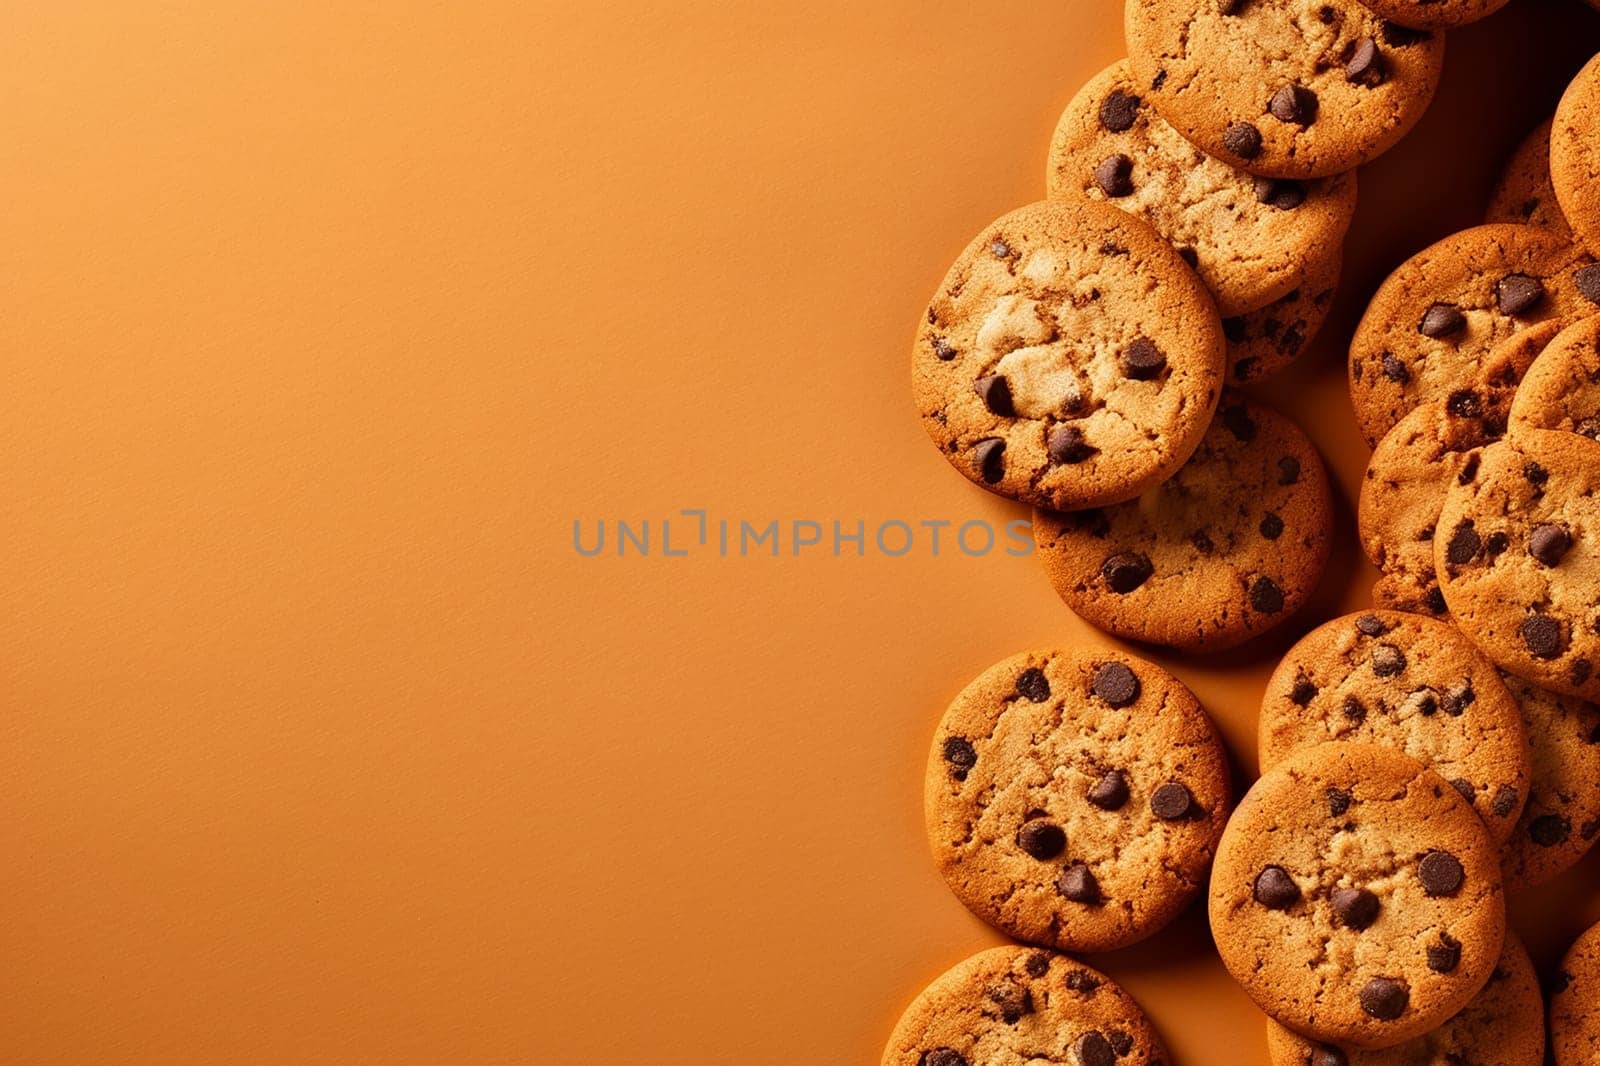 Chocolate chip cookies scattered with chocolate morsels on dark background by Hype2art